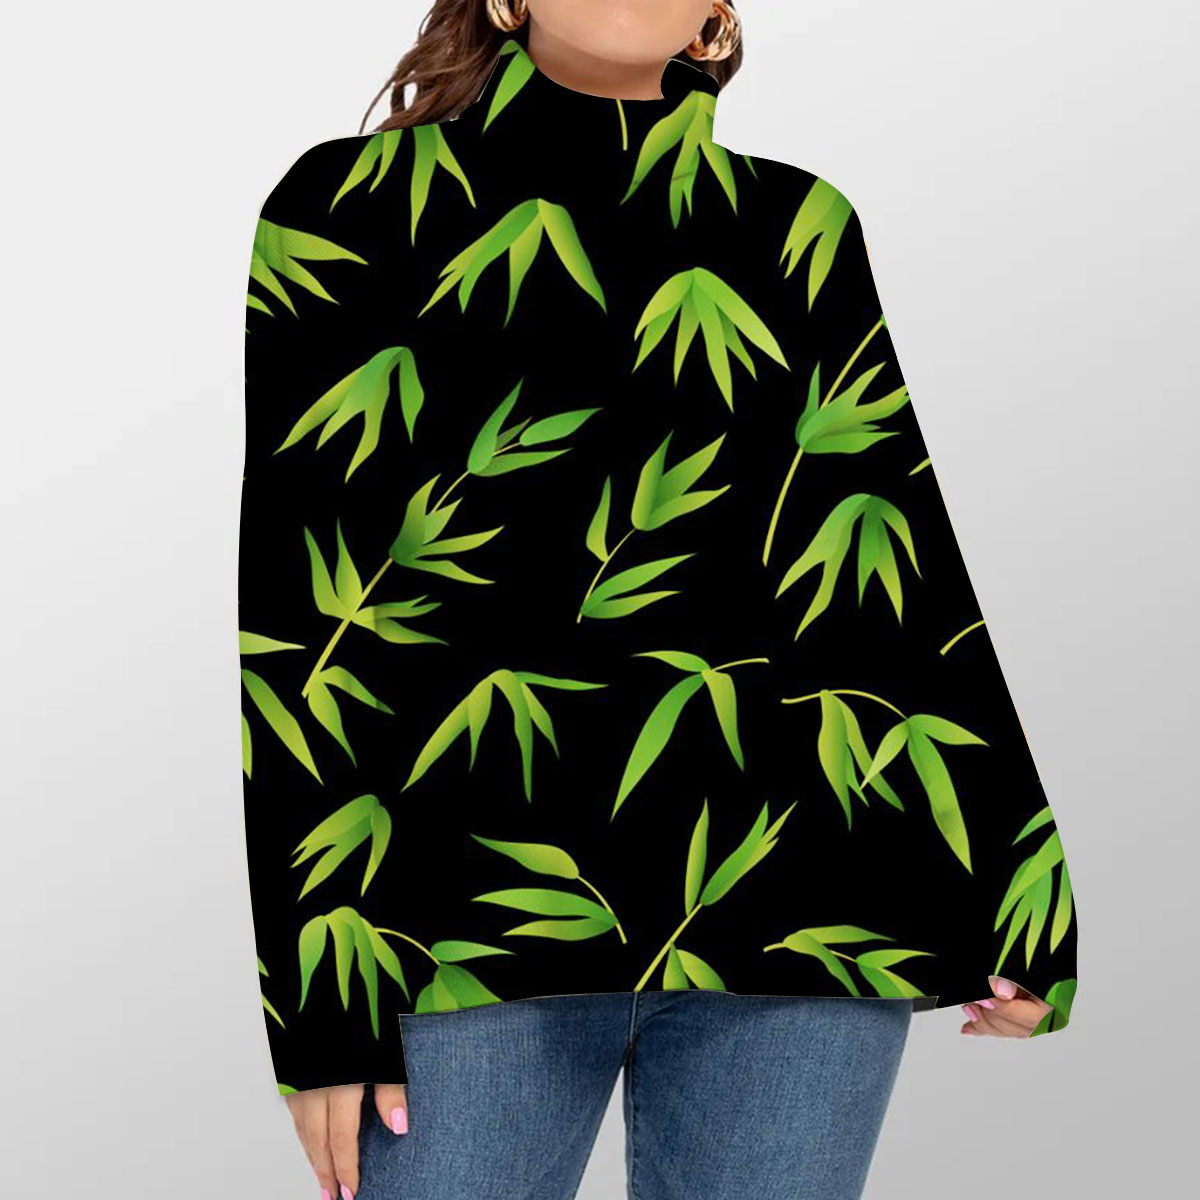 Tropical Bamboo Leaves Turtleneck Sweater